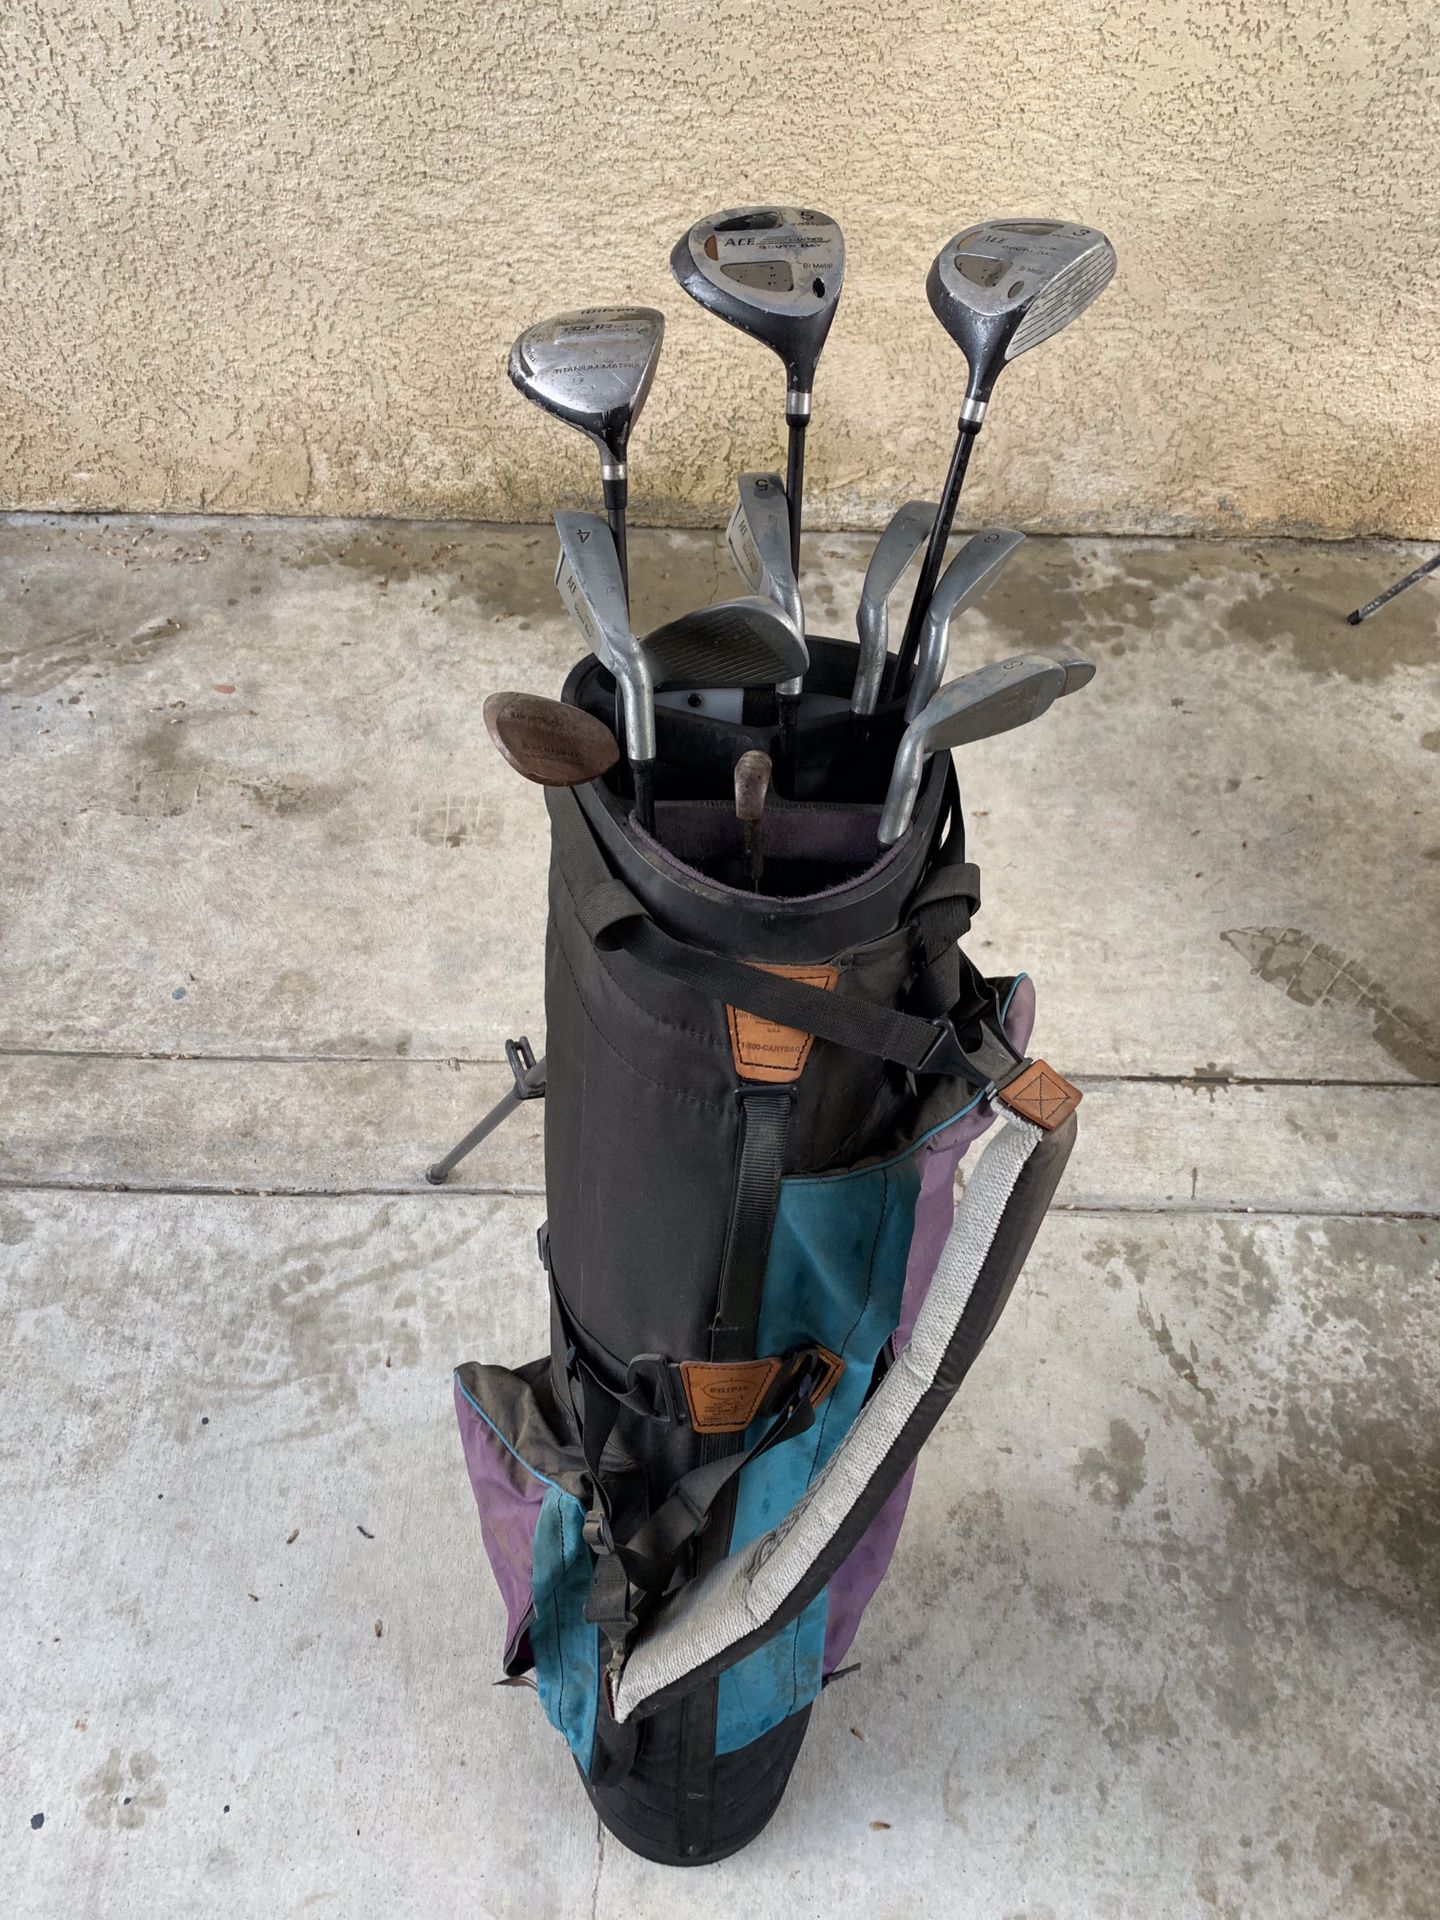 Miscellaneous golf clubs with bag